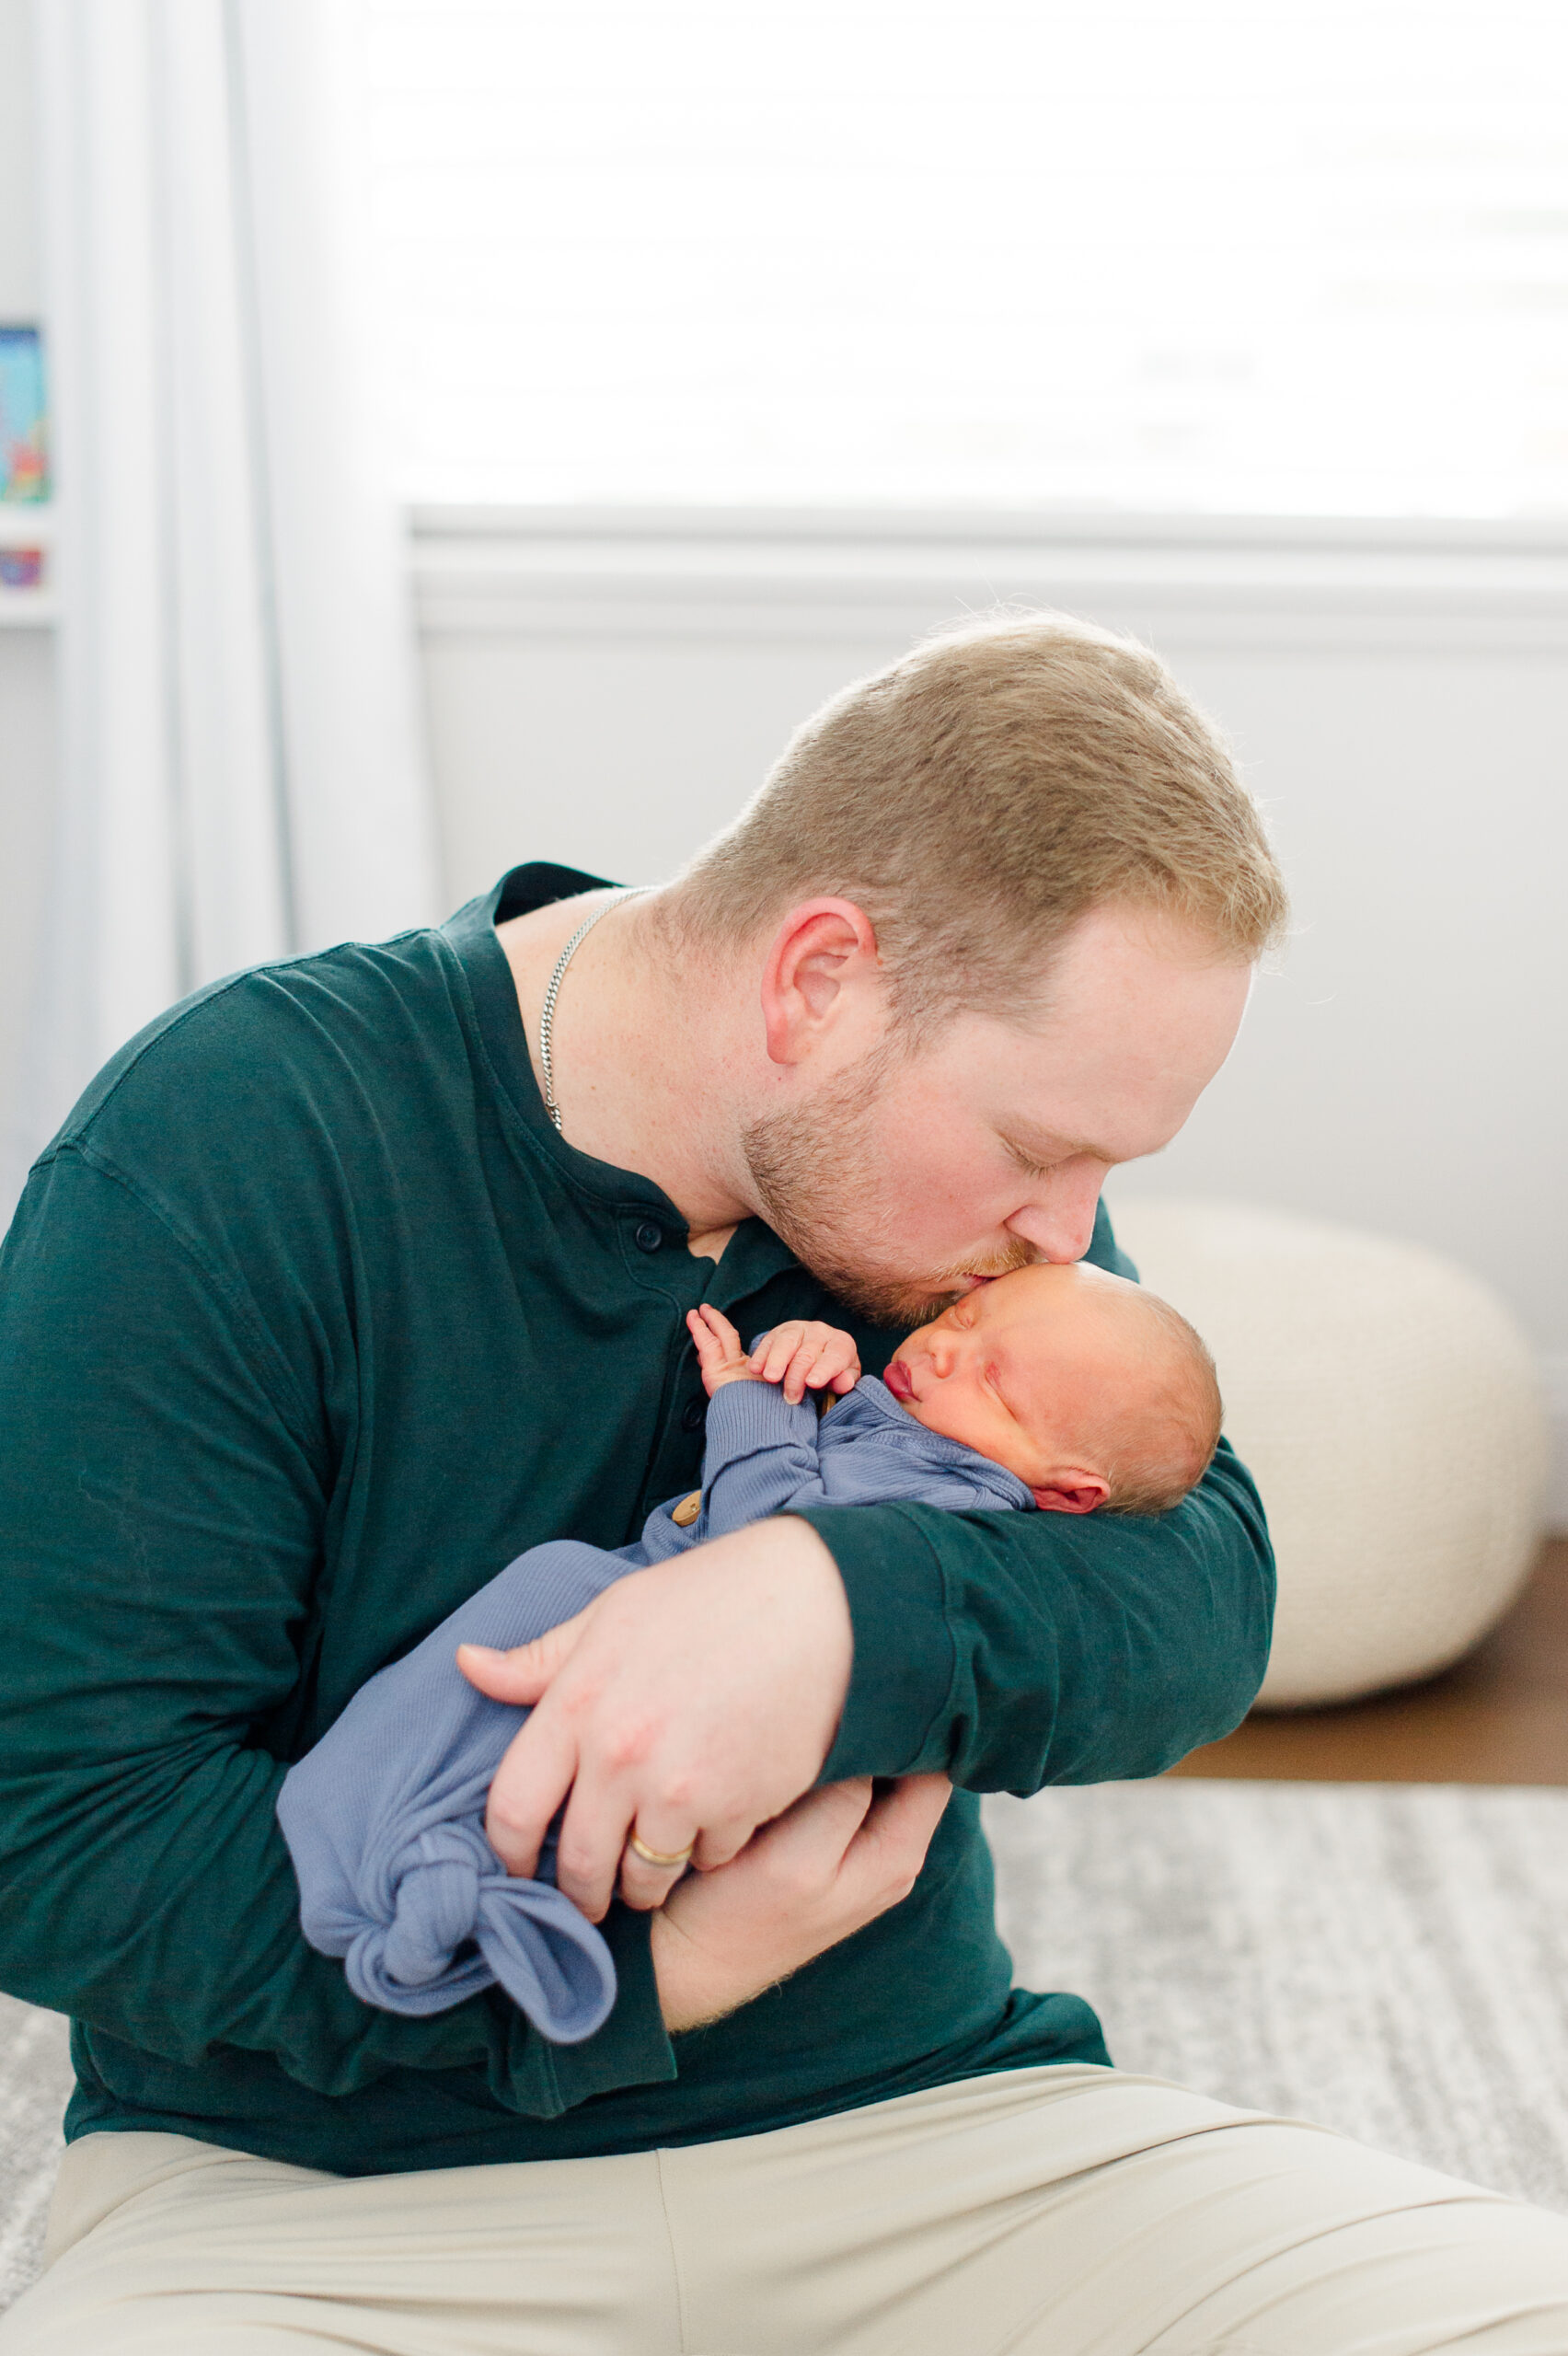 Dad holds newborn son close and gives him kisses on the forehead during newborn photos.